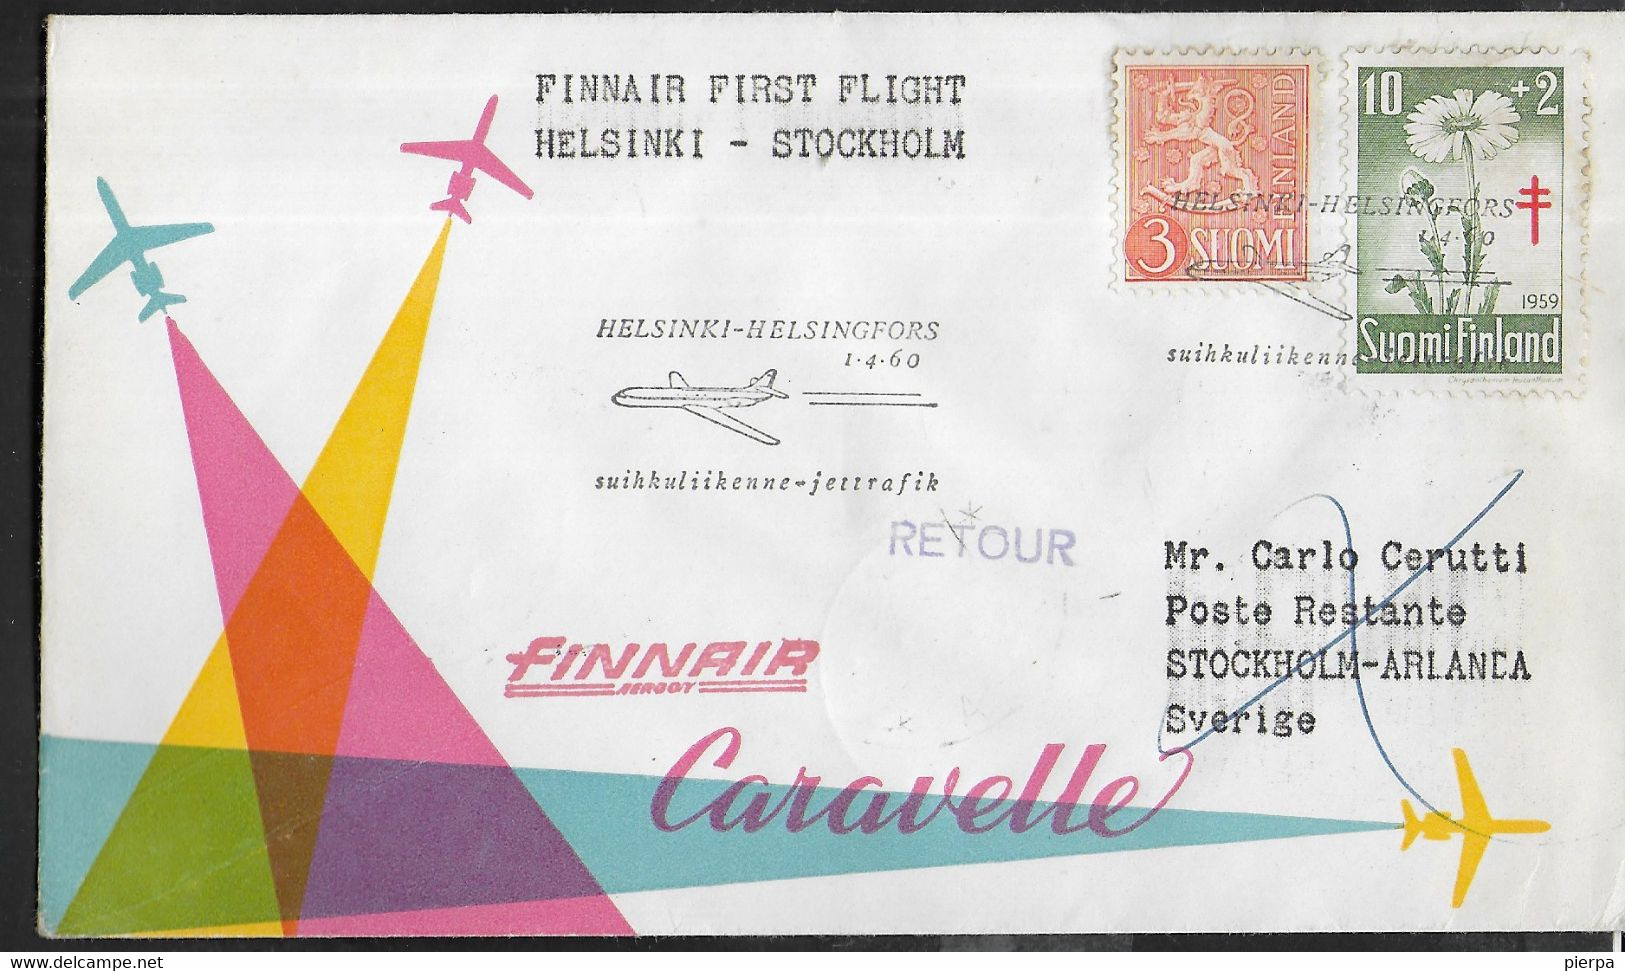 FINLAND - PRIMO VOLO - FIRST FLIGHT FINNAIR - HELSINKI / STOCKHOLM - 1.4.60 - SU BUSTA UFFICIALE - Covers & Documents